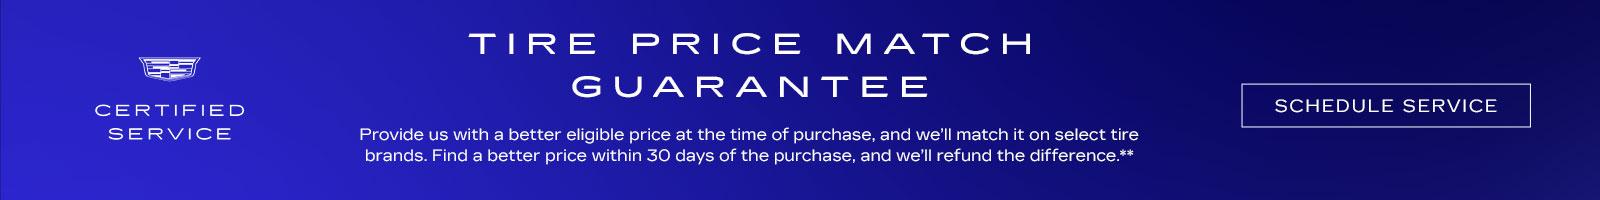 TIRE PRICE MATCH GUARANTEE Provide us with a better eligible price at the time of purchase, and we'll match it on select tire brands. Find a better price within 30 days of the purchase, and we'll refund the difference.**